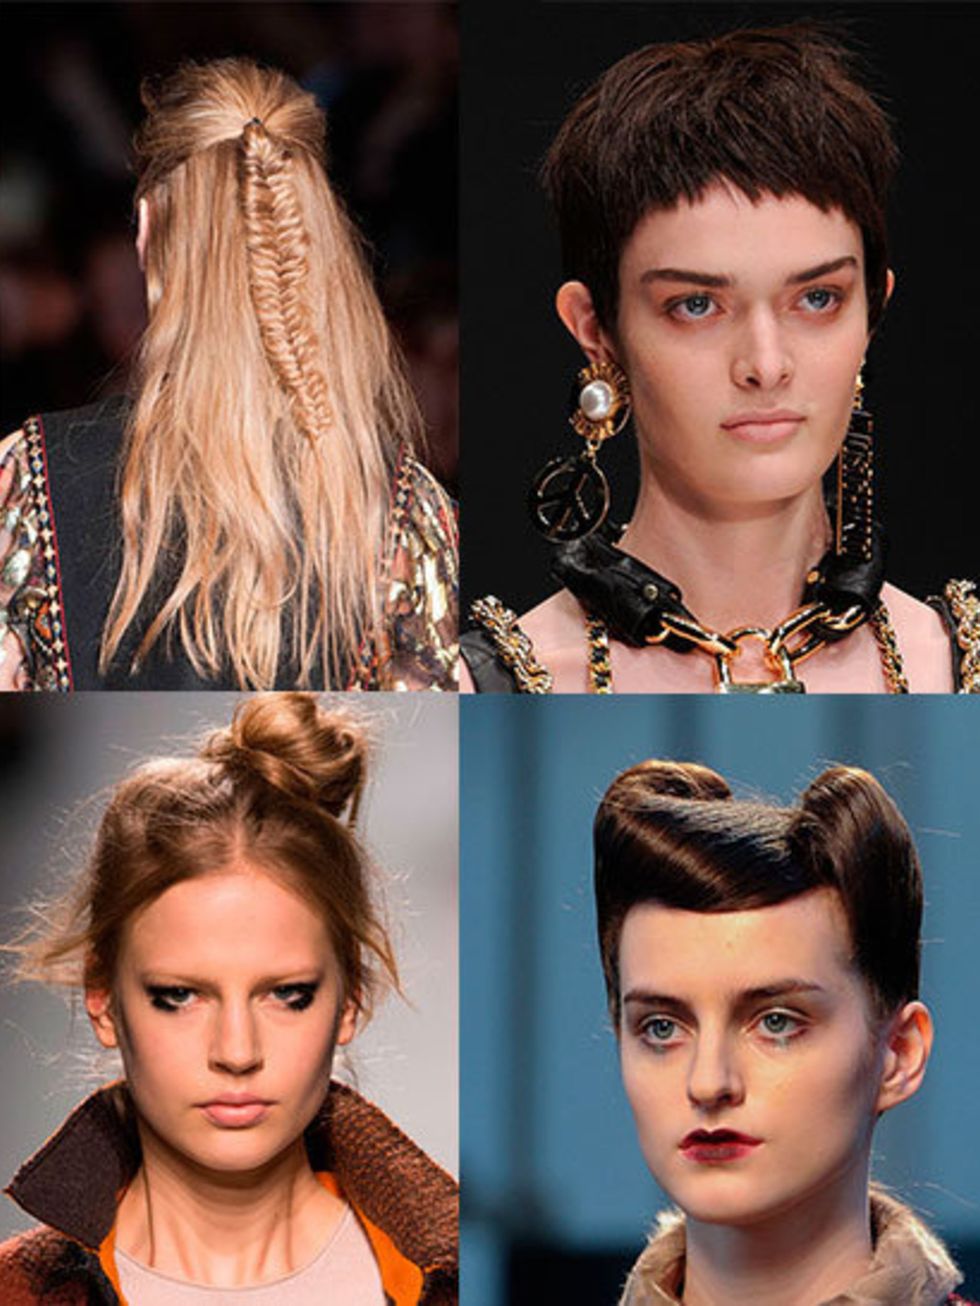 <p>The Milanese are connoisseurs when it comes to attention to detail; from intricate braided buns at <a href="http://www.elleuk.com/catwalk/designer-a-z/dolce-gabbana">Dolce and Gabbana</a> to delicately dishevelled fishtail plaits at <a href="http://www